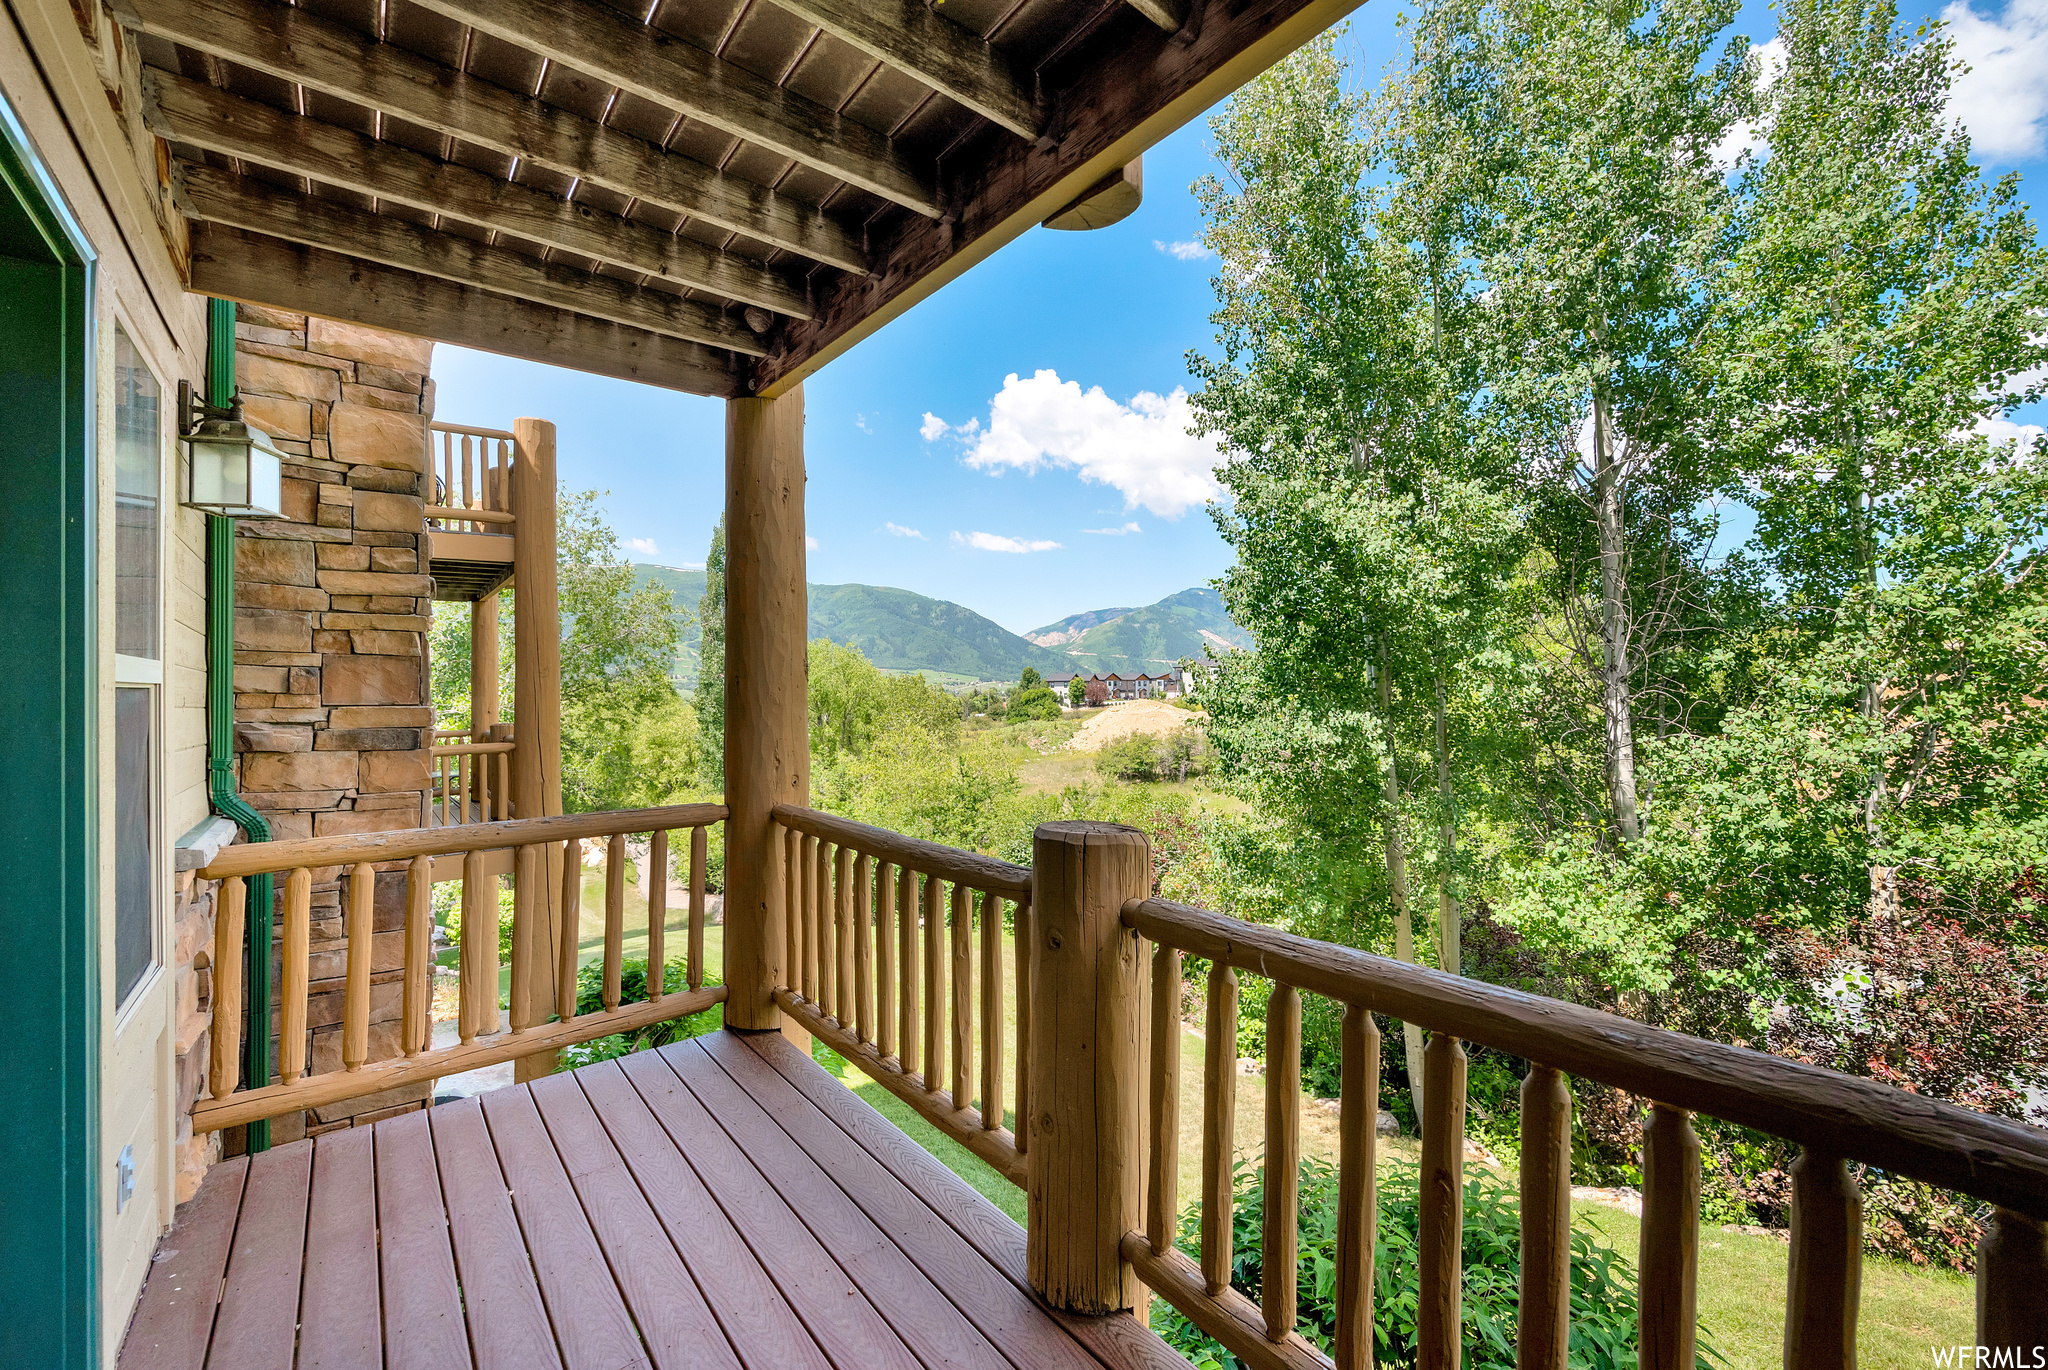 Exterior Balcony: Wooden deck with a mountain view